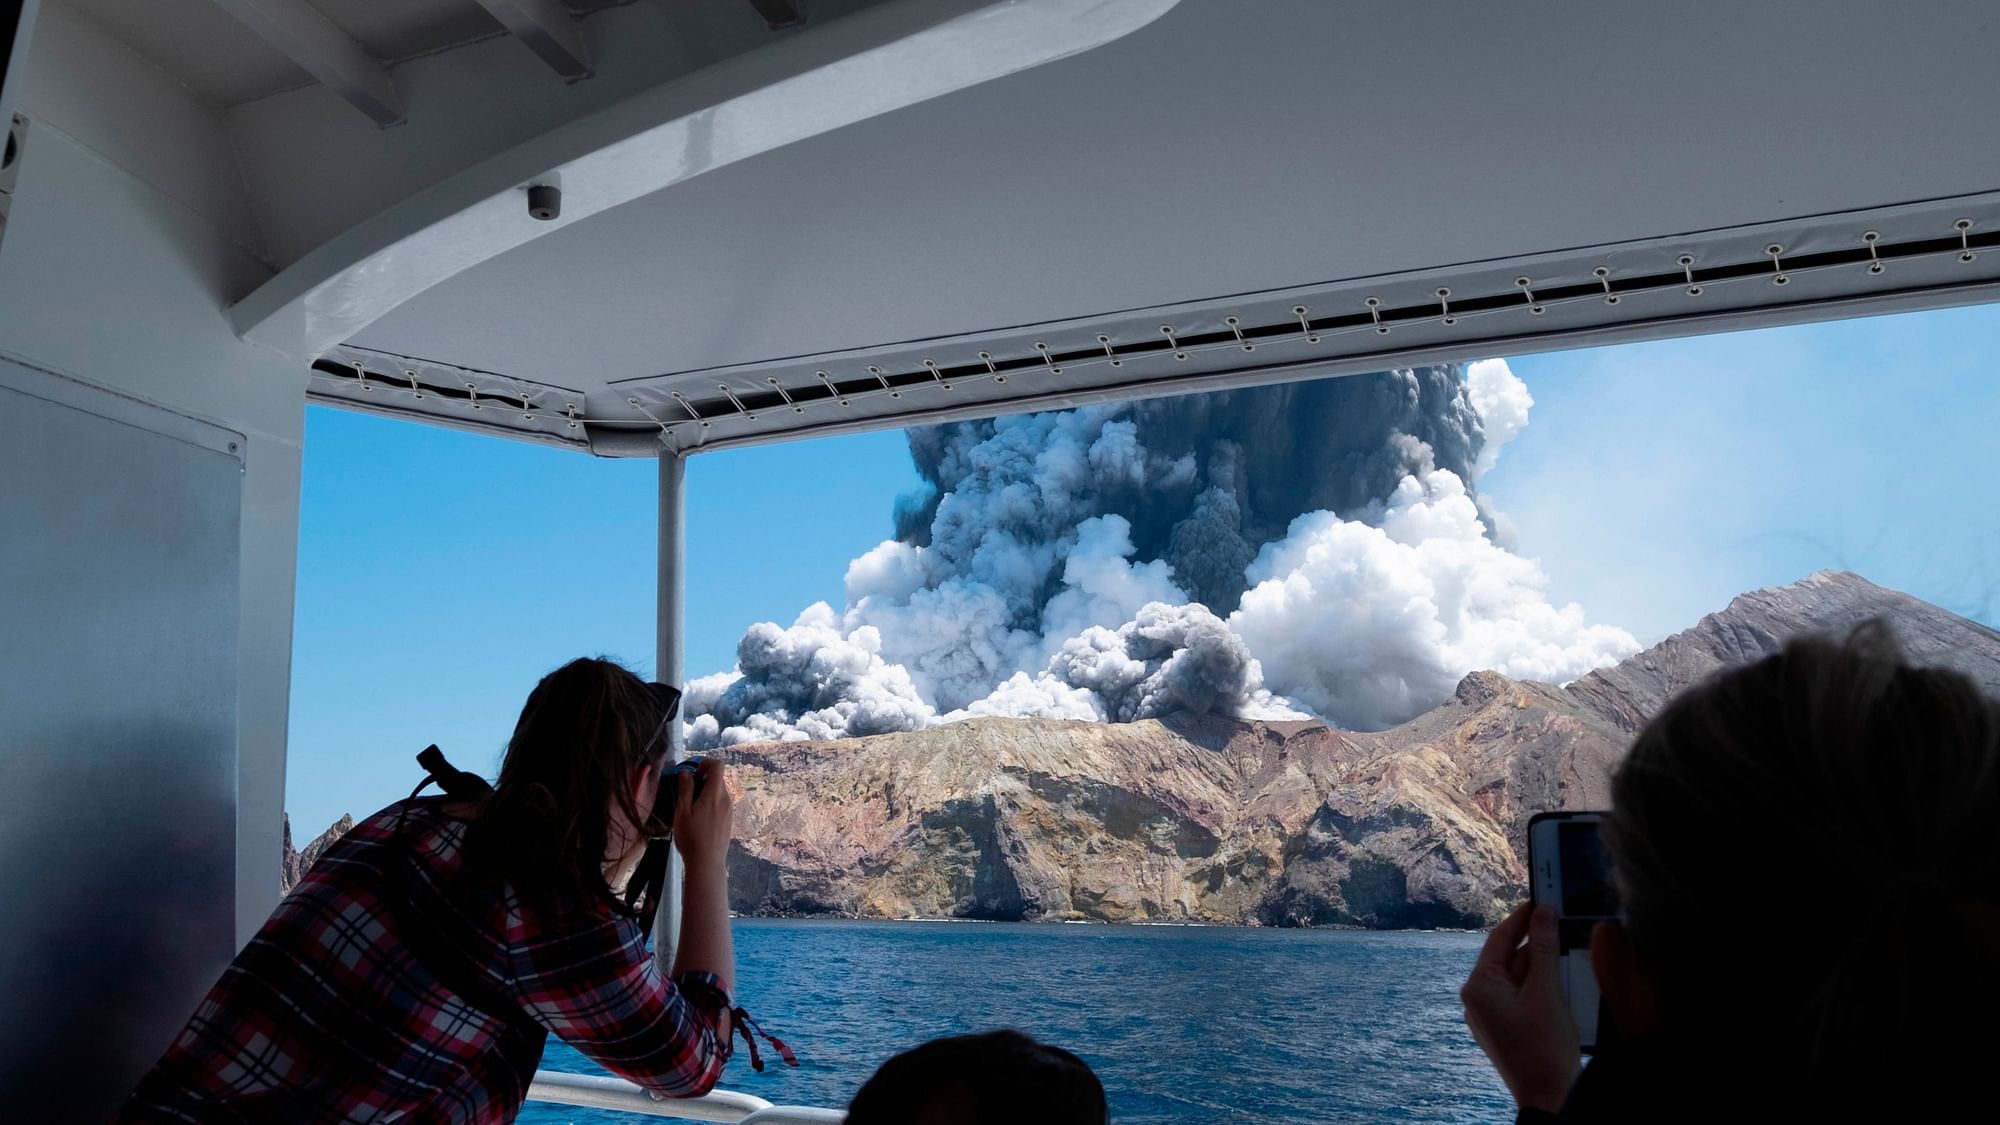  Tourists on a boat look at the eruption of the volcano on White Island, New Zealand.&nbsp;